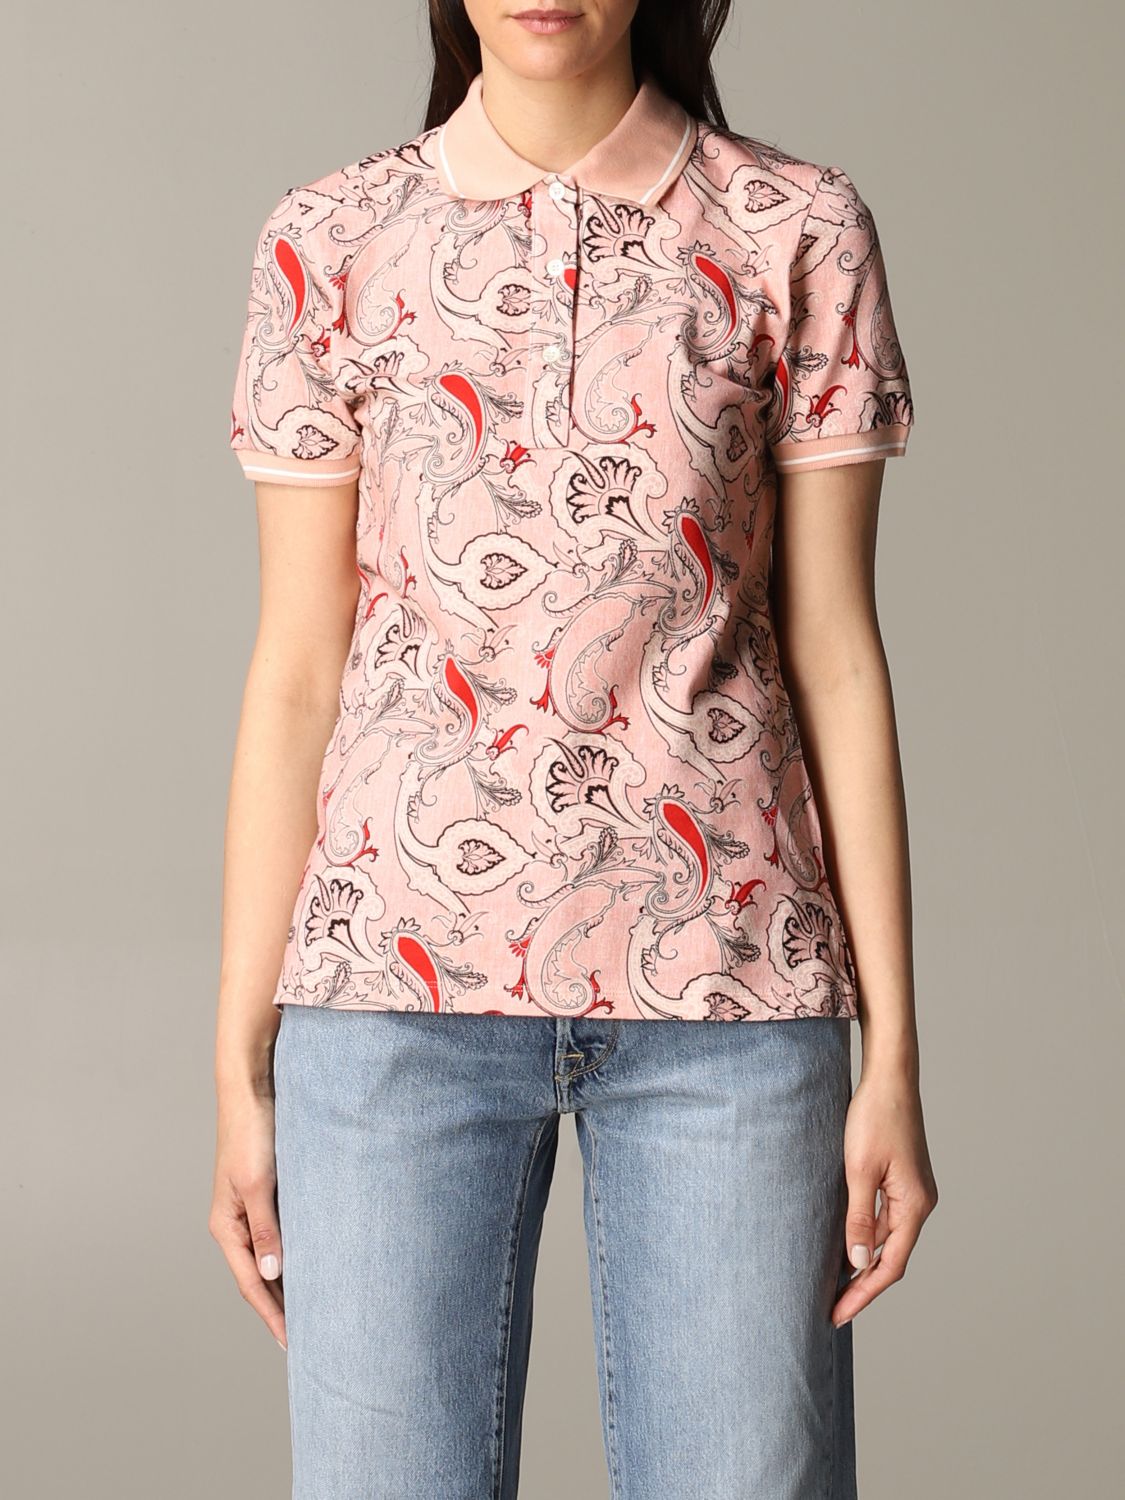 womens patterned polo shirts